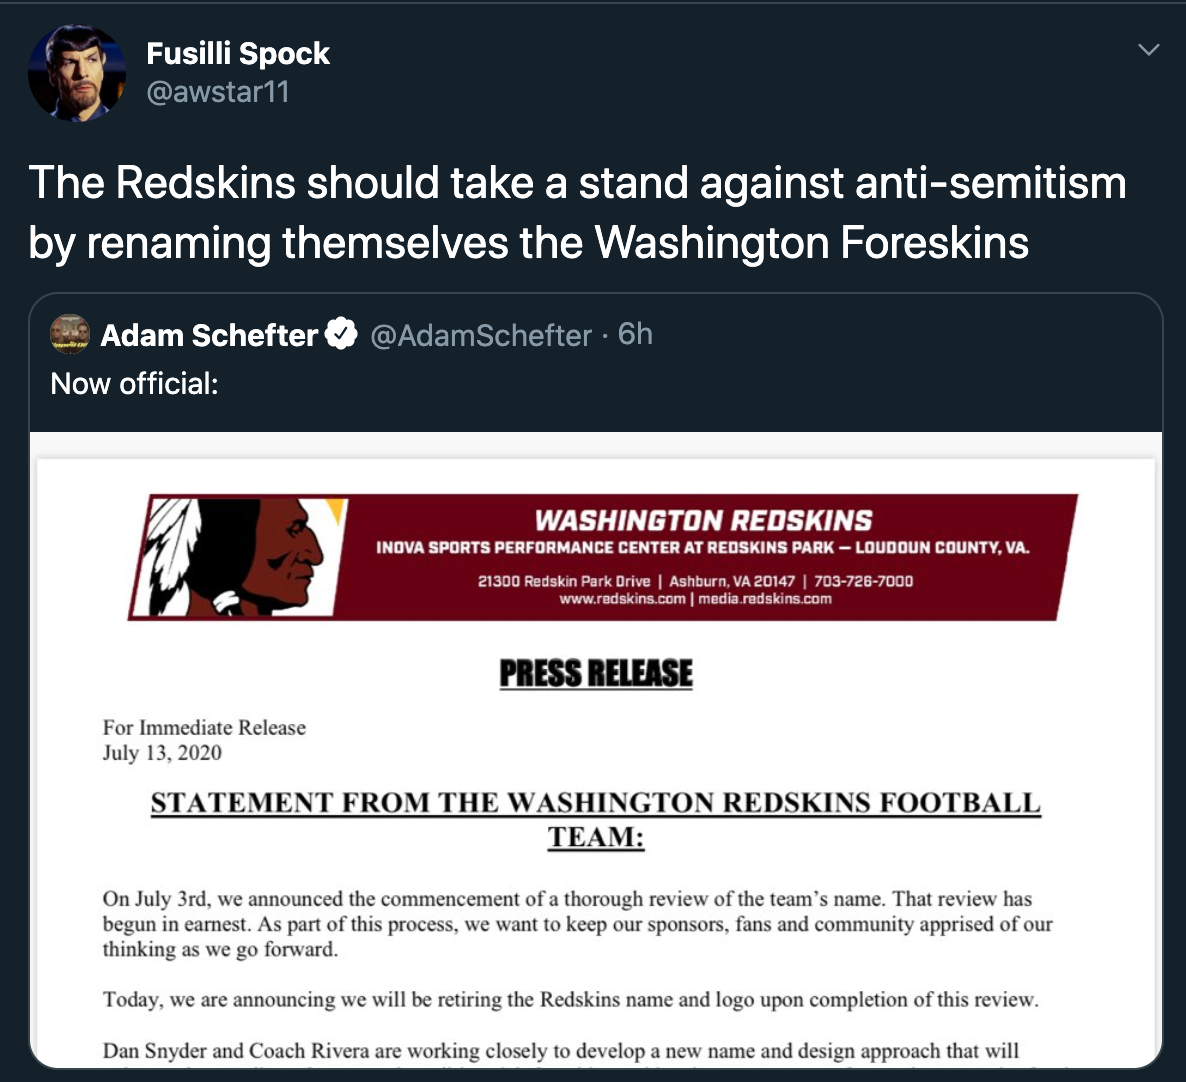 The Redskins should take a stand against antisemitism by renaming themselves the Washington Foreskins